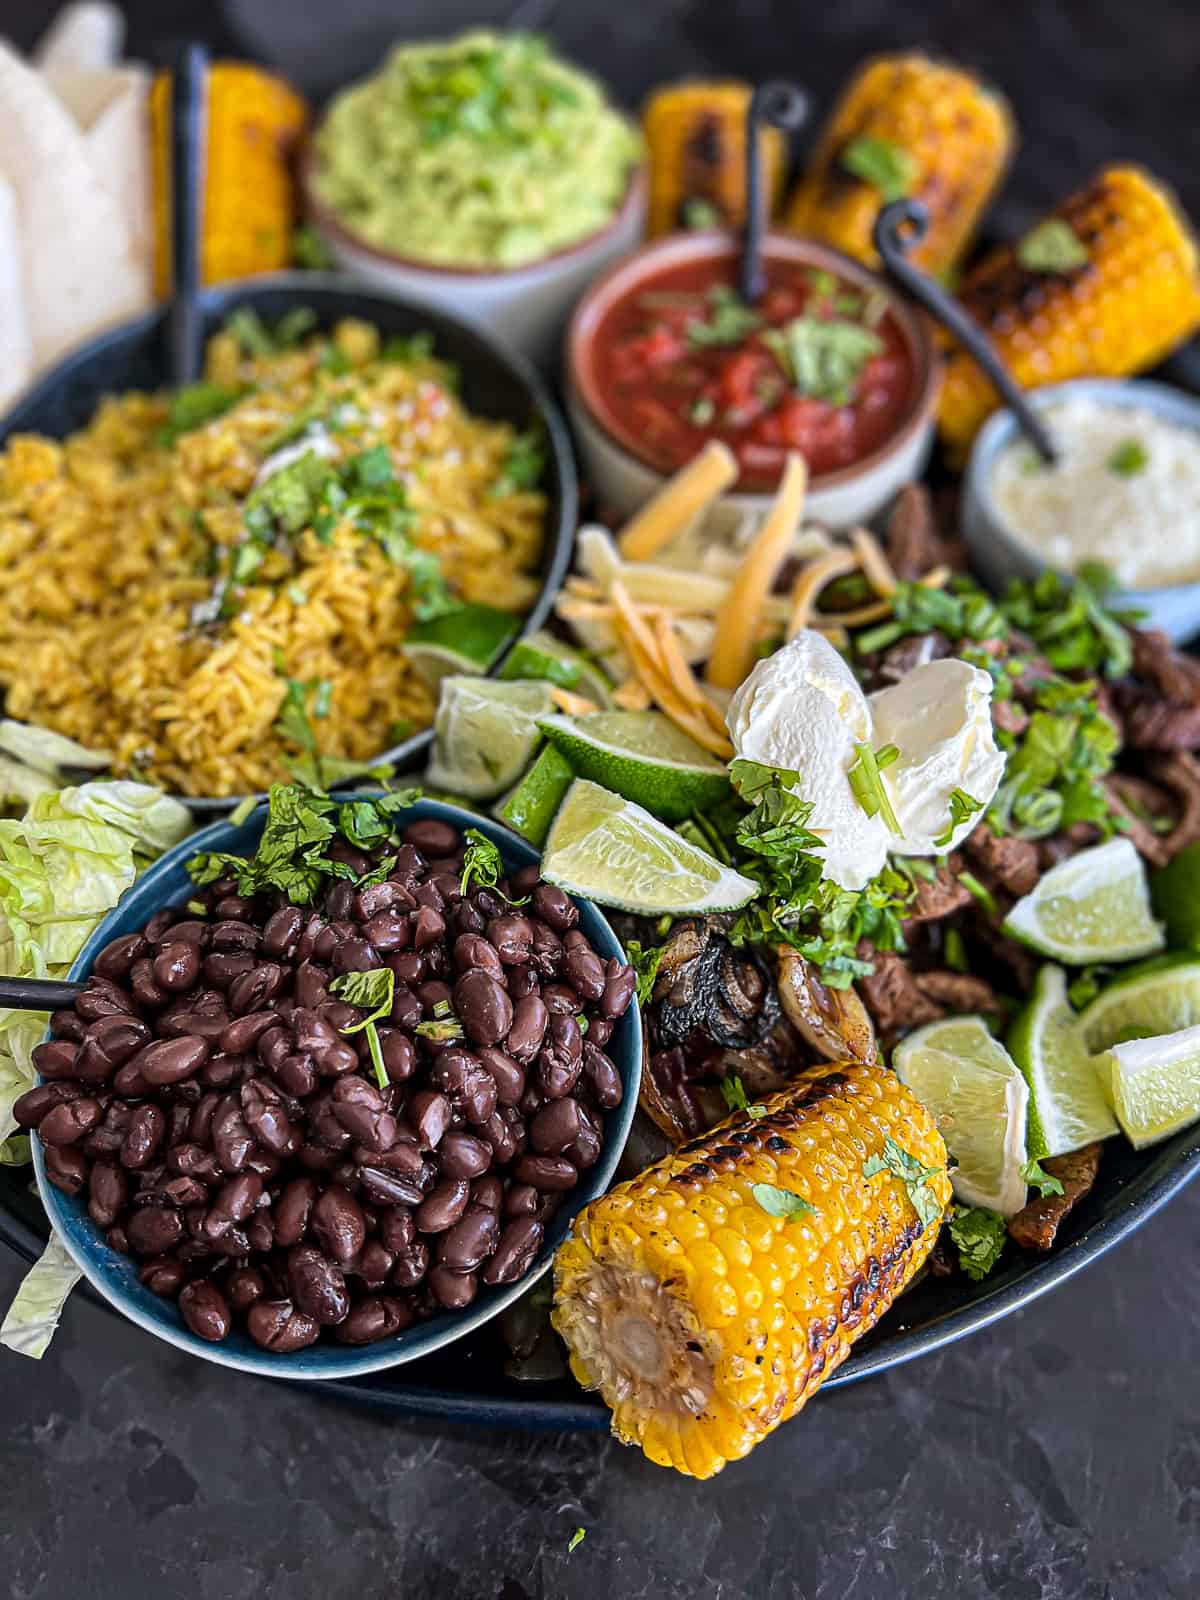 Fajitas Platter with Corn on the cob and other side dishes 